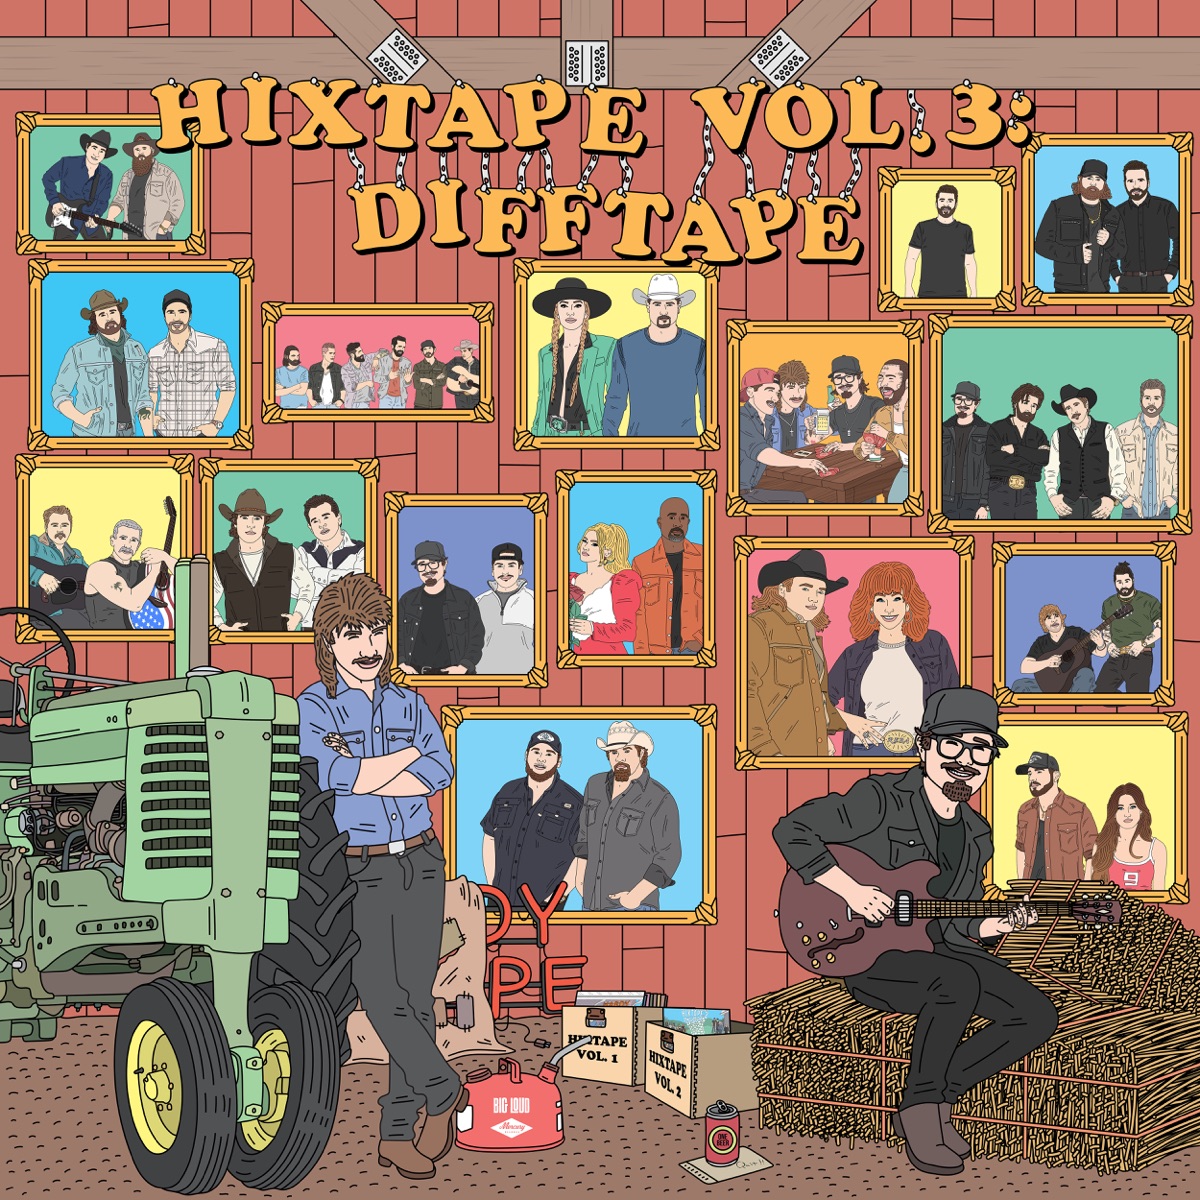 Hixtape Volume 3 features songs that were written by Joe Diffie before he passed away. Photo via Apple Music